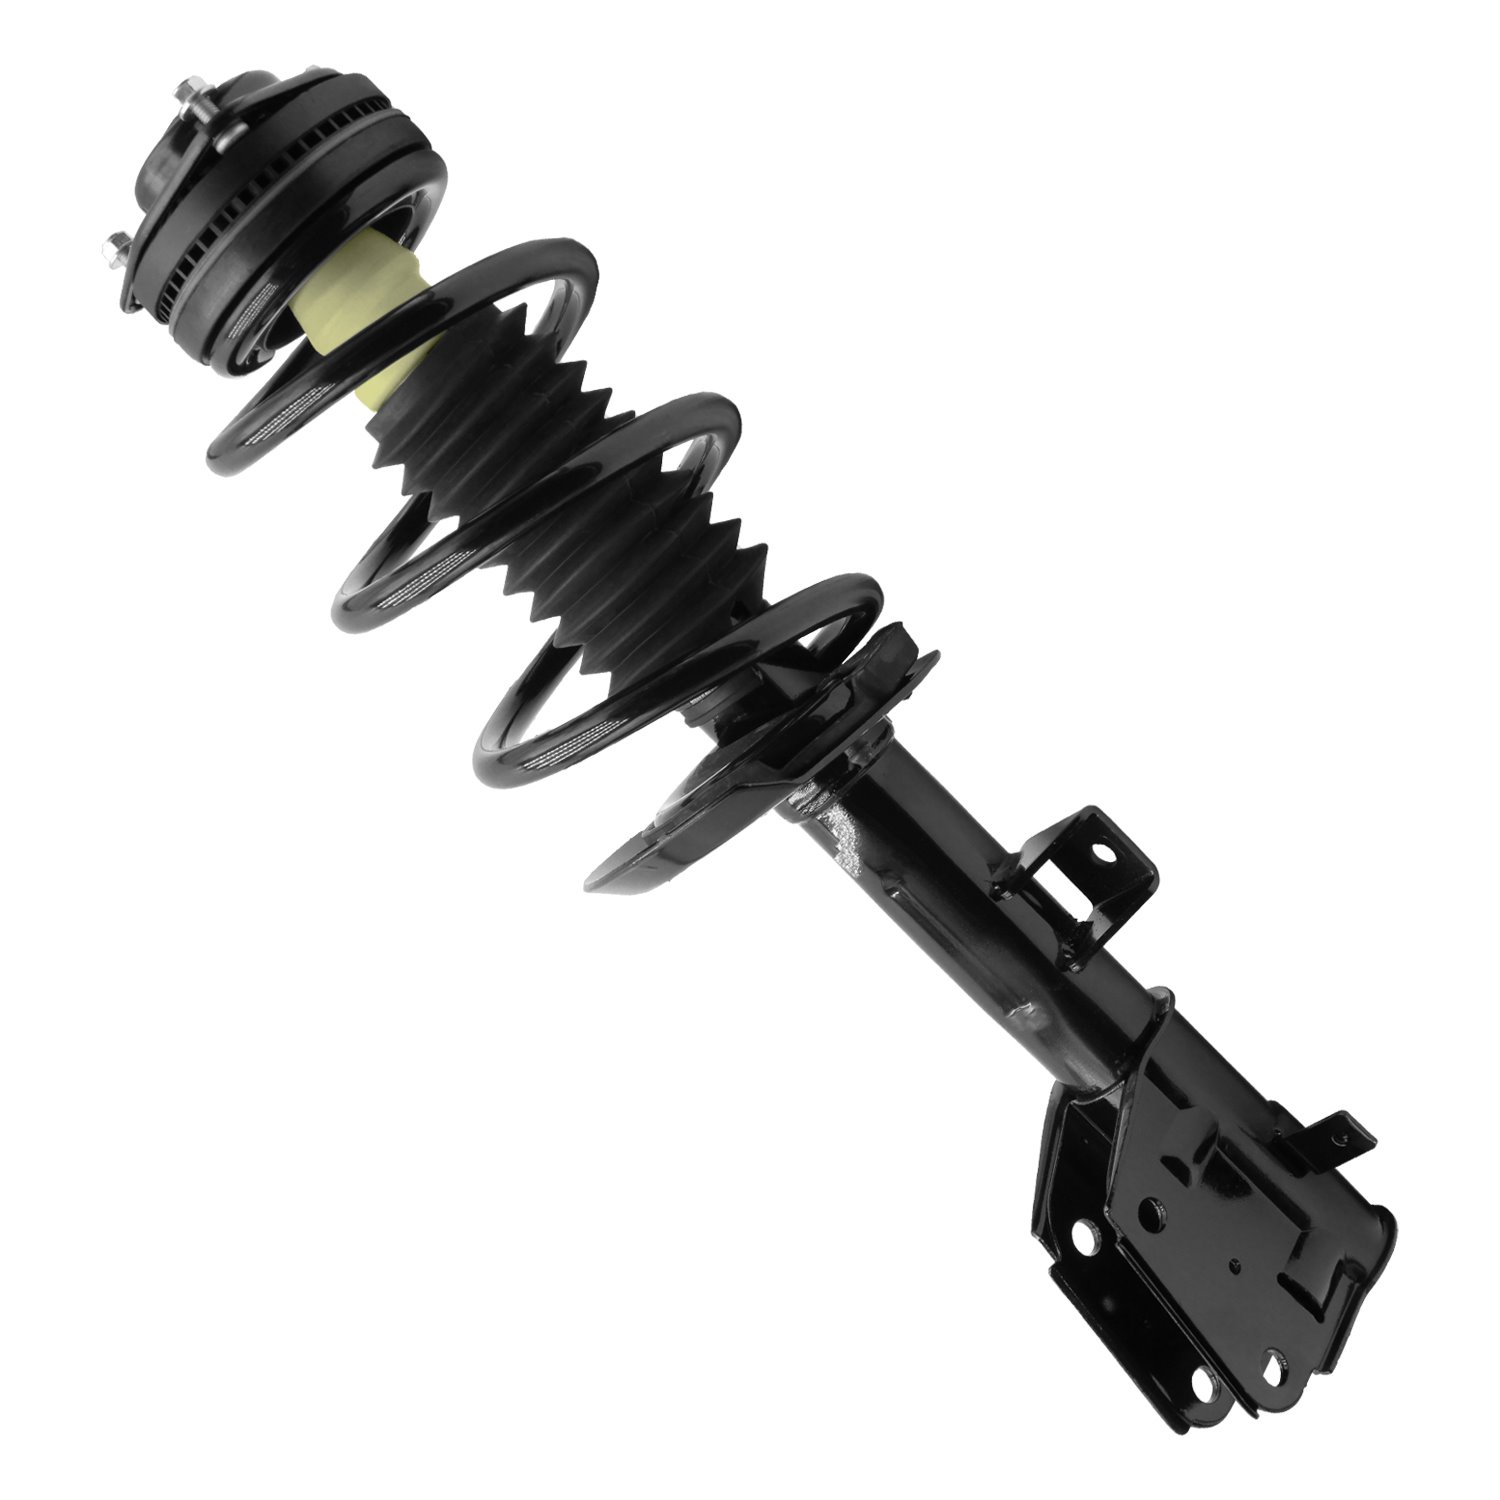 13683 Front Suspension Strut & Coil Spring Assemby Fits Select Chrysler Pacifica